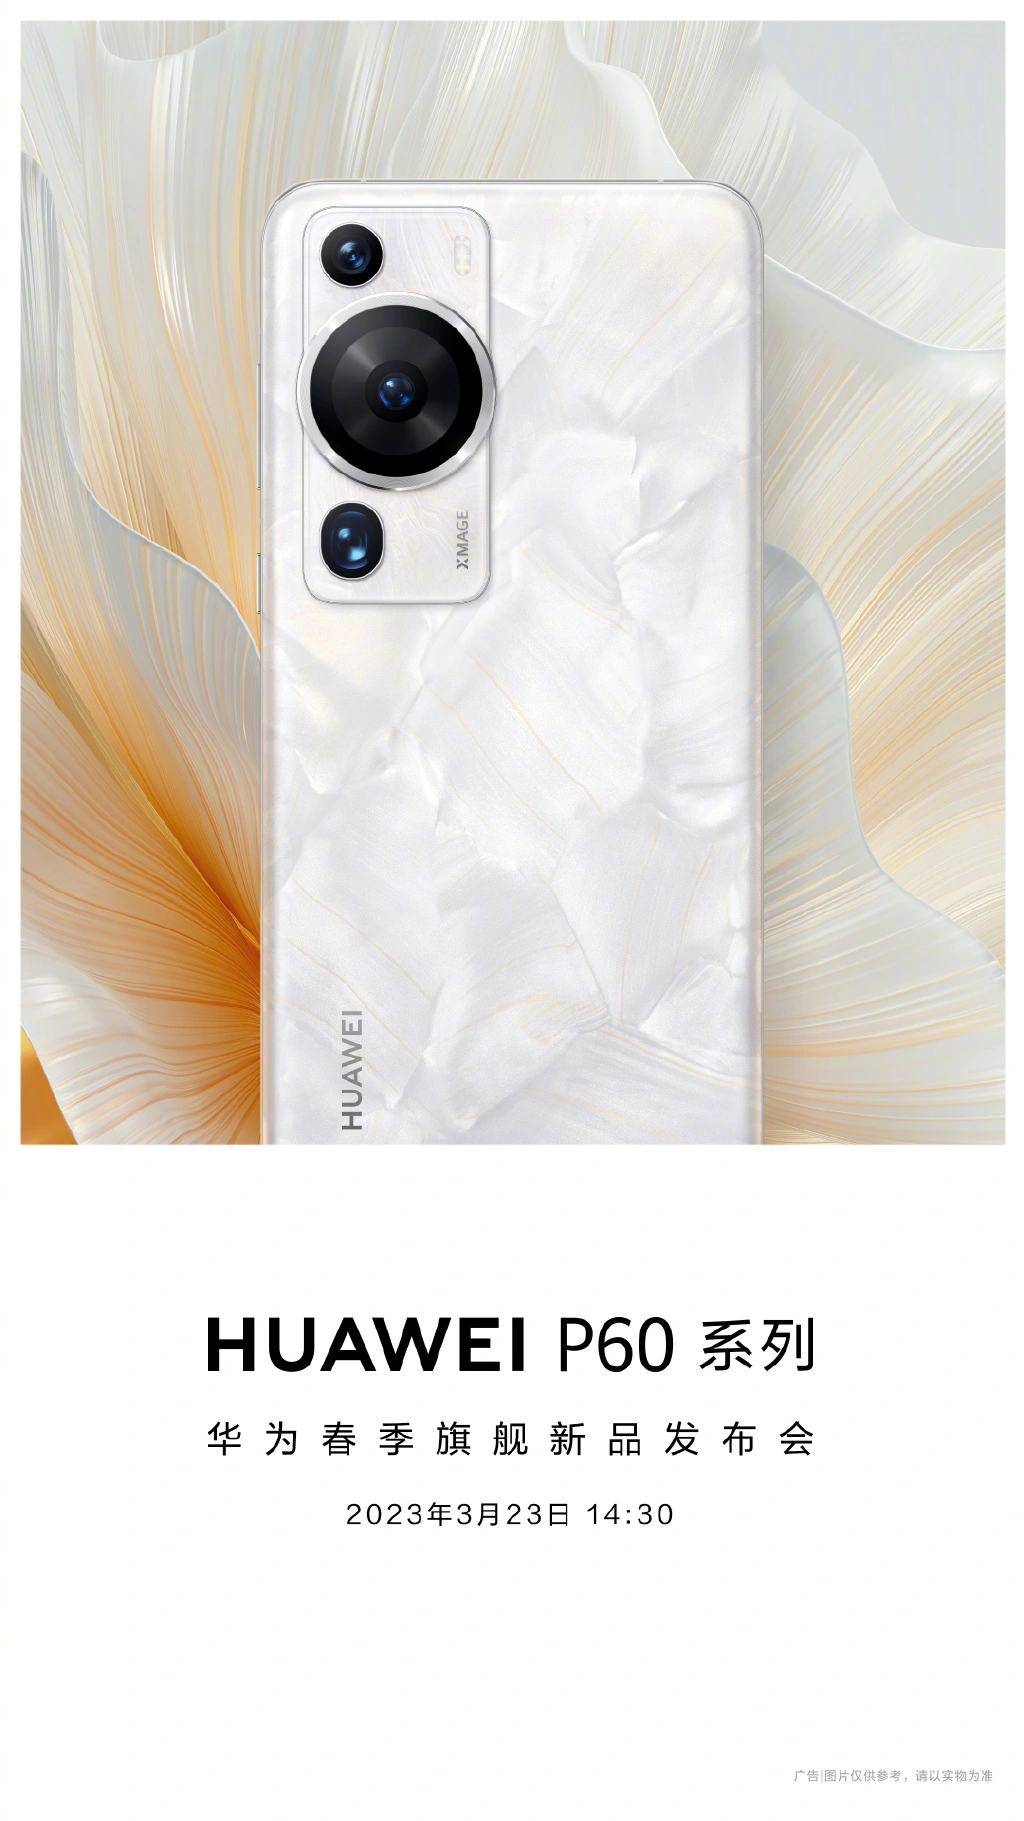 The appearance of Huawei P60 mobile phone is announced